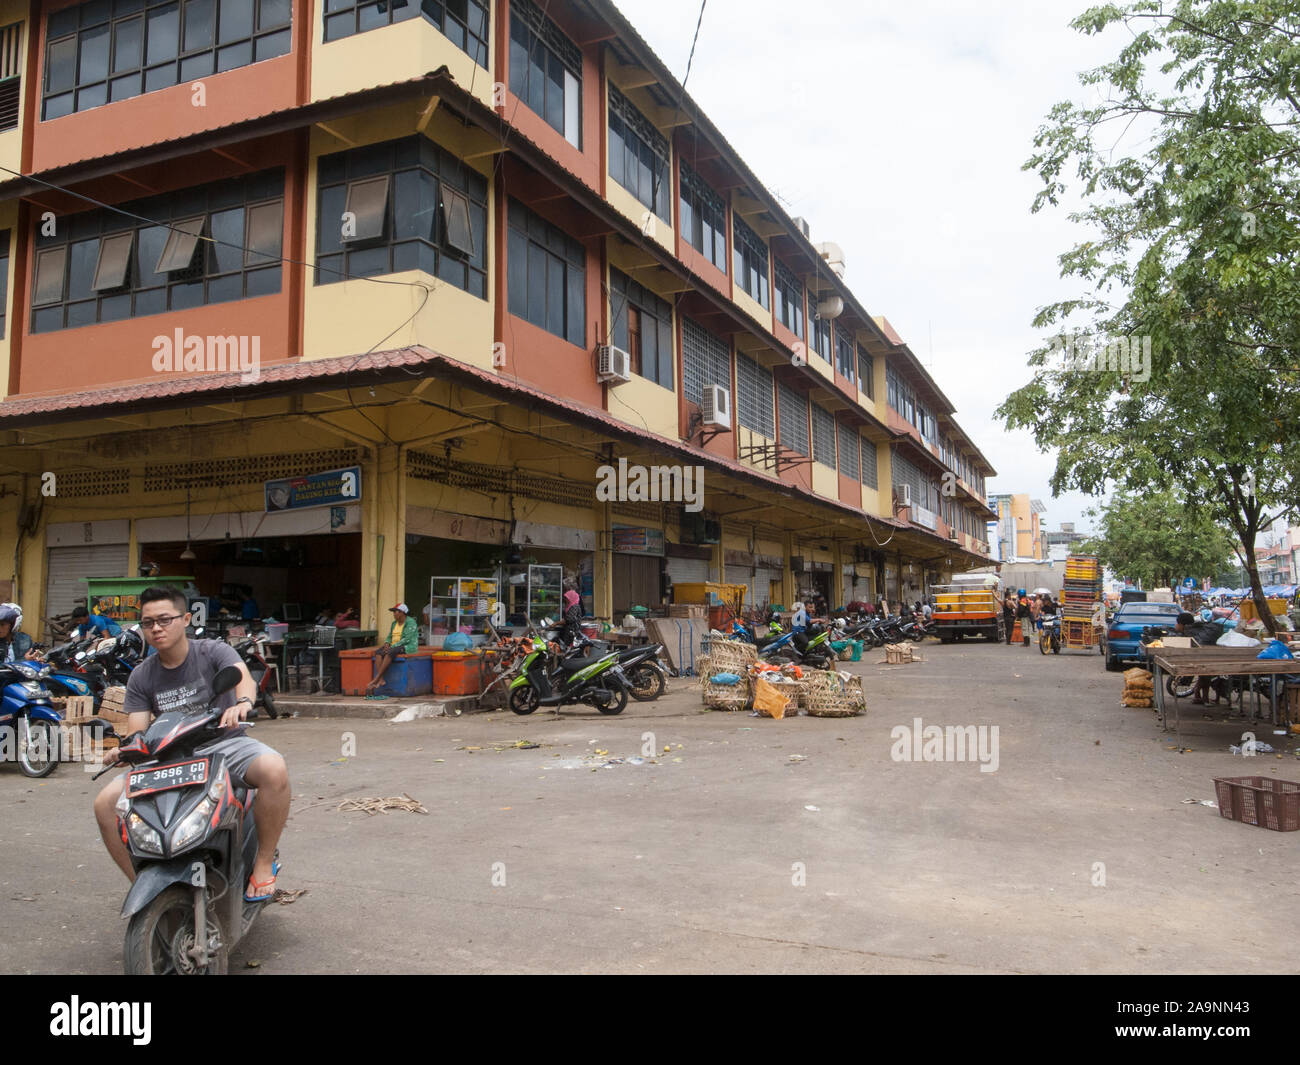 Batam, Indonesia - February 7, 2015: People activities at the local market in the Jodoh Area of Batam City. Stock Photo